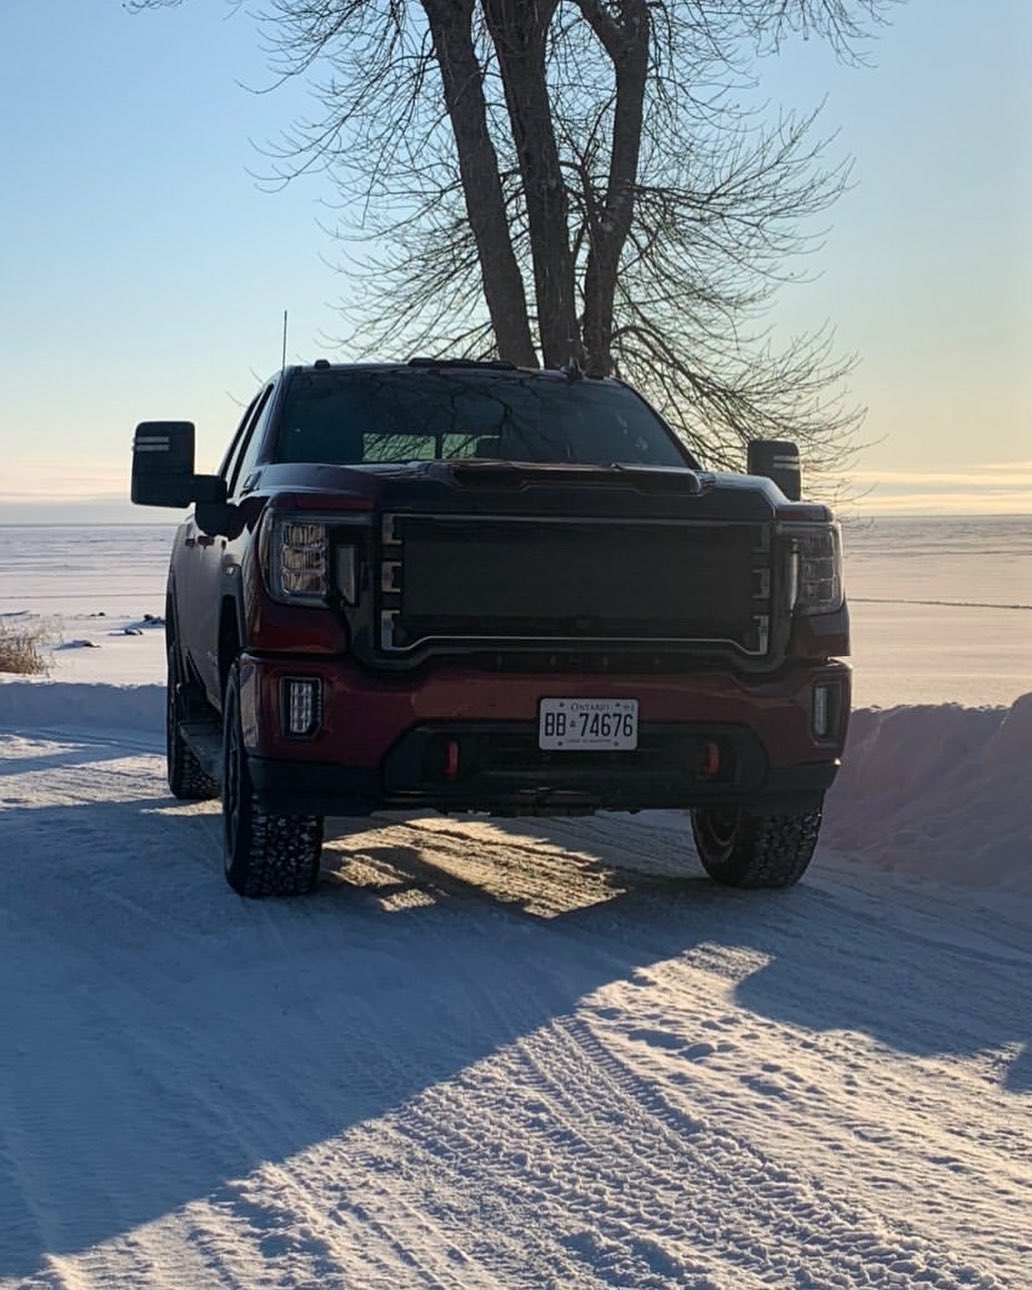 tough truck on the frozen tundra